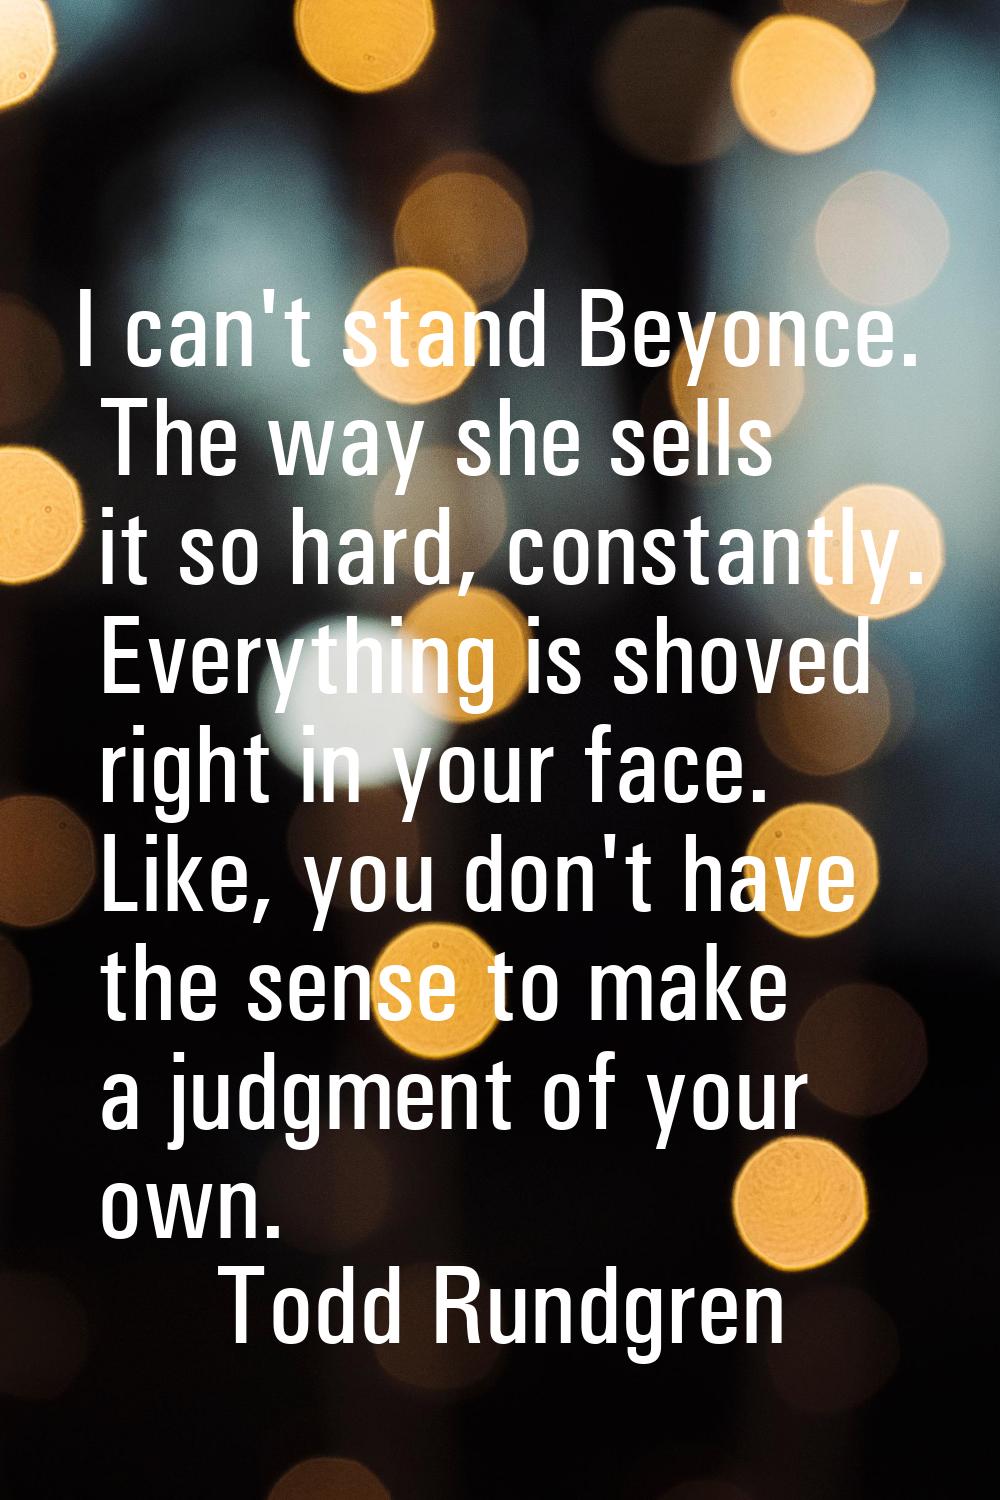 I can't stand Beyonce. The way she sells it so hard, constantly. Everything is shoved right in your